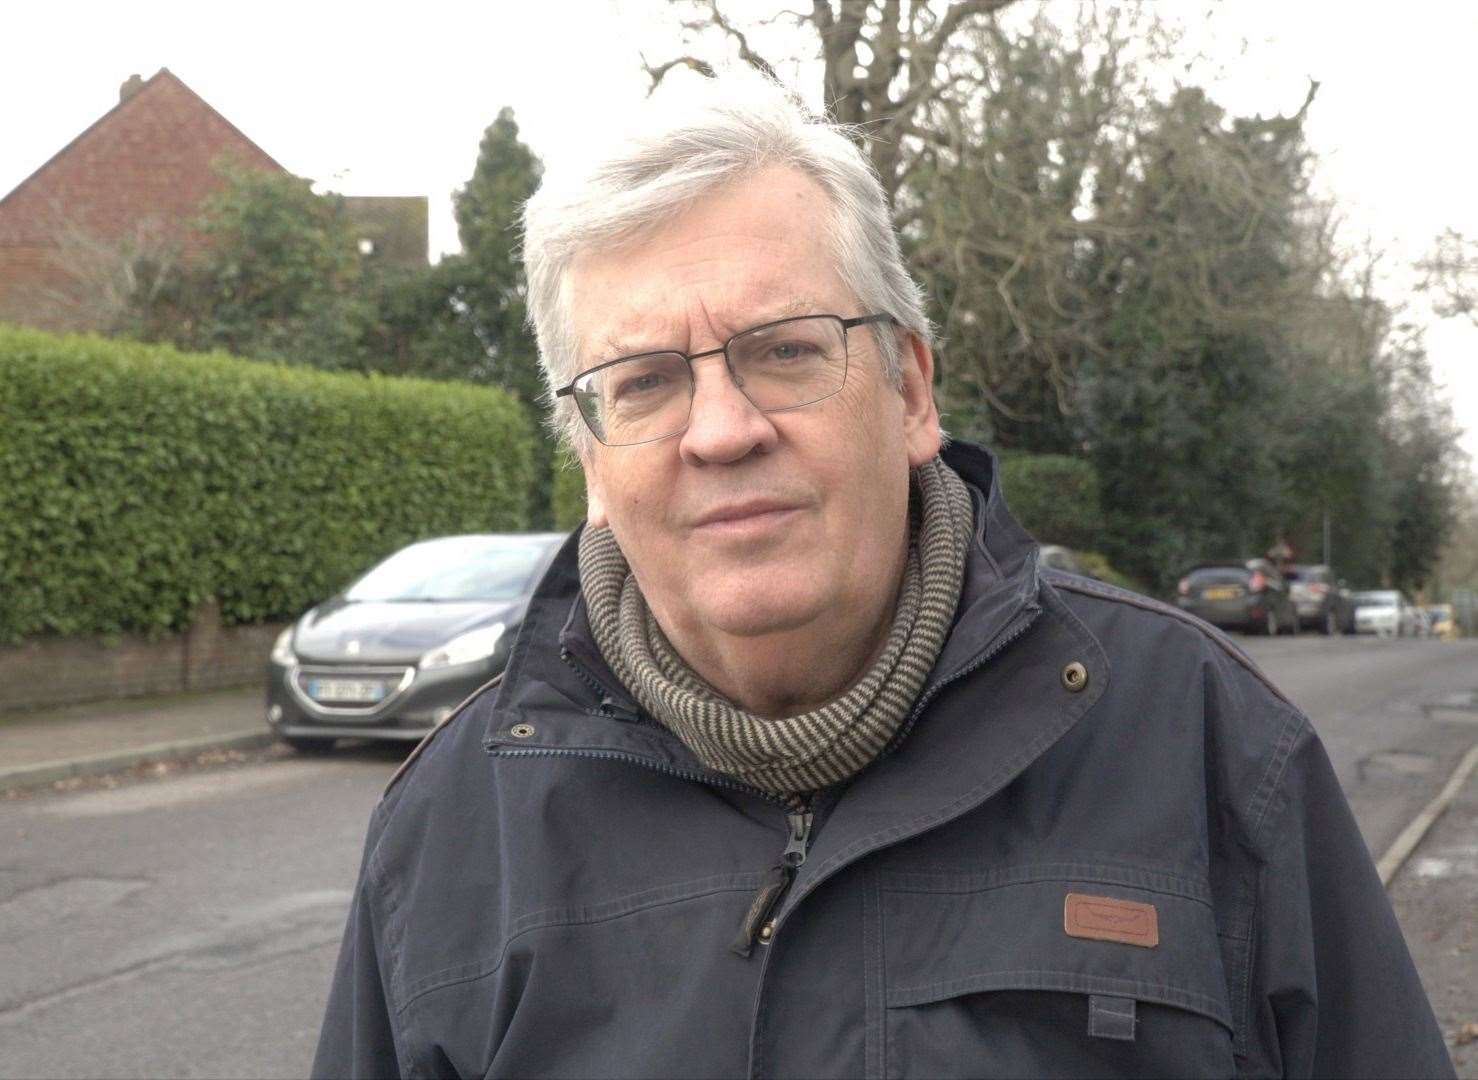 Councillor David Ward has been campaigning about Tenterden’s pothole crisis for more than a year